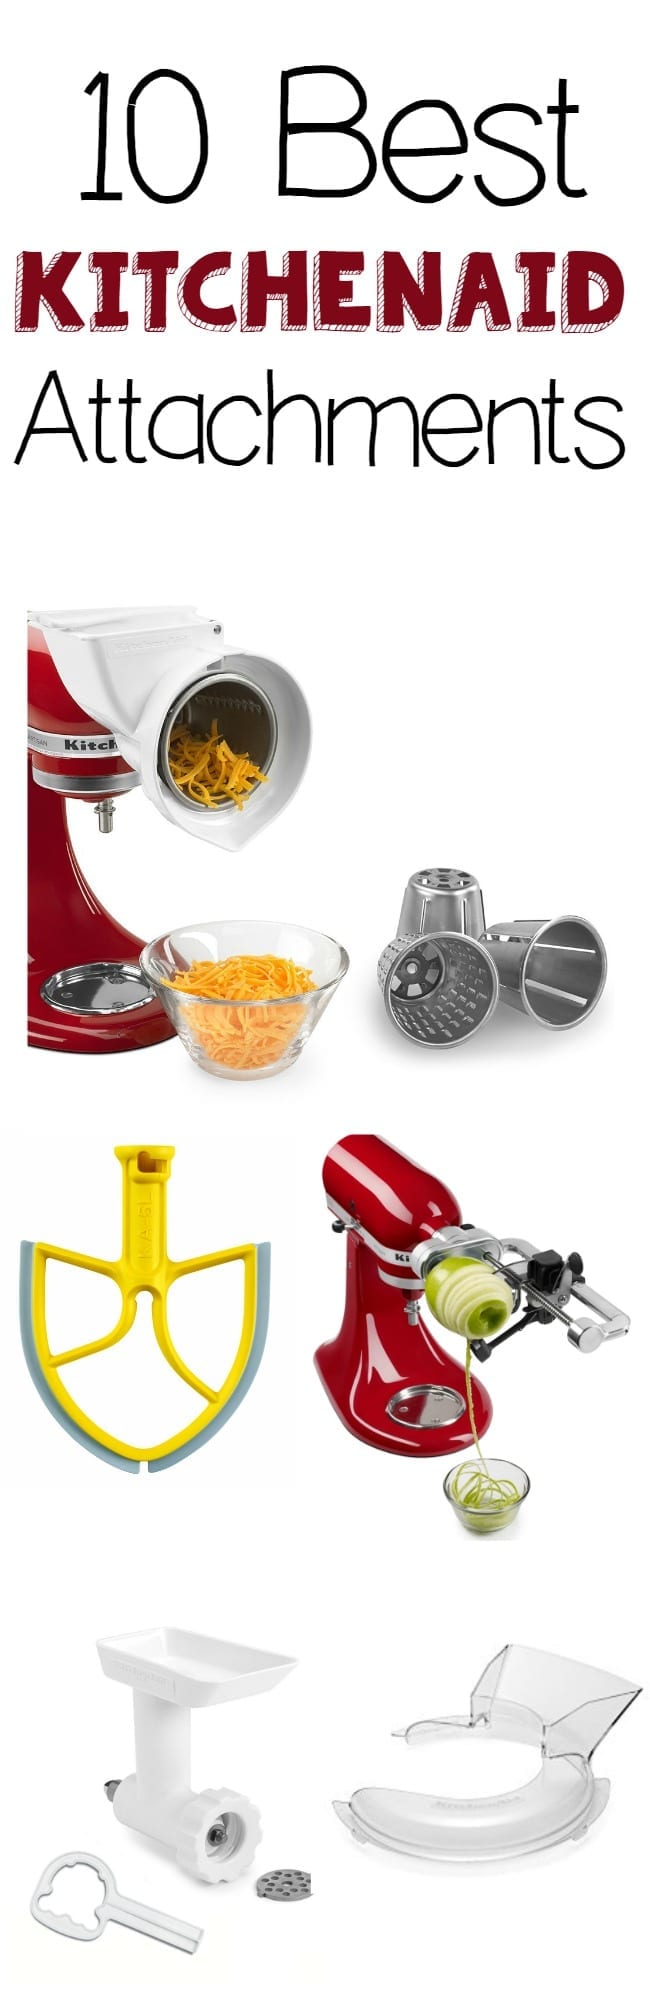 10 BEST kitchenaid attachments! Have a Kitchenaid Check out these great attachments and what they do!